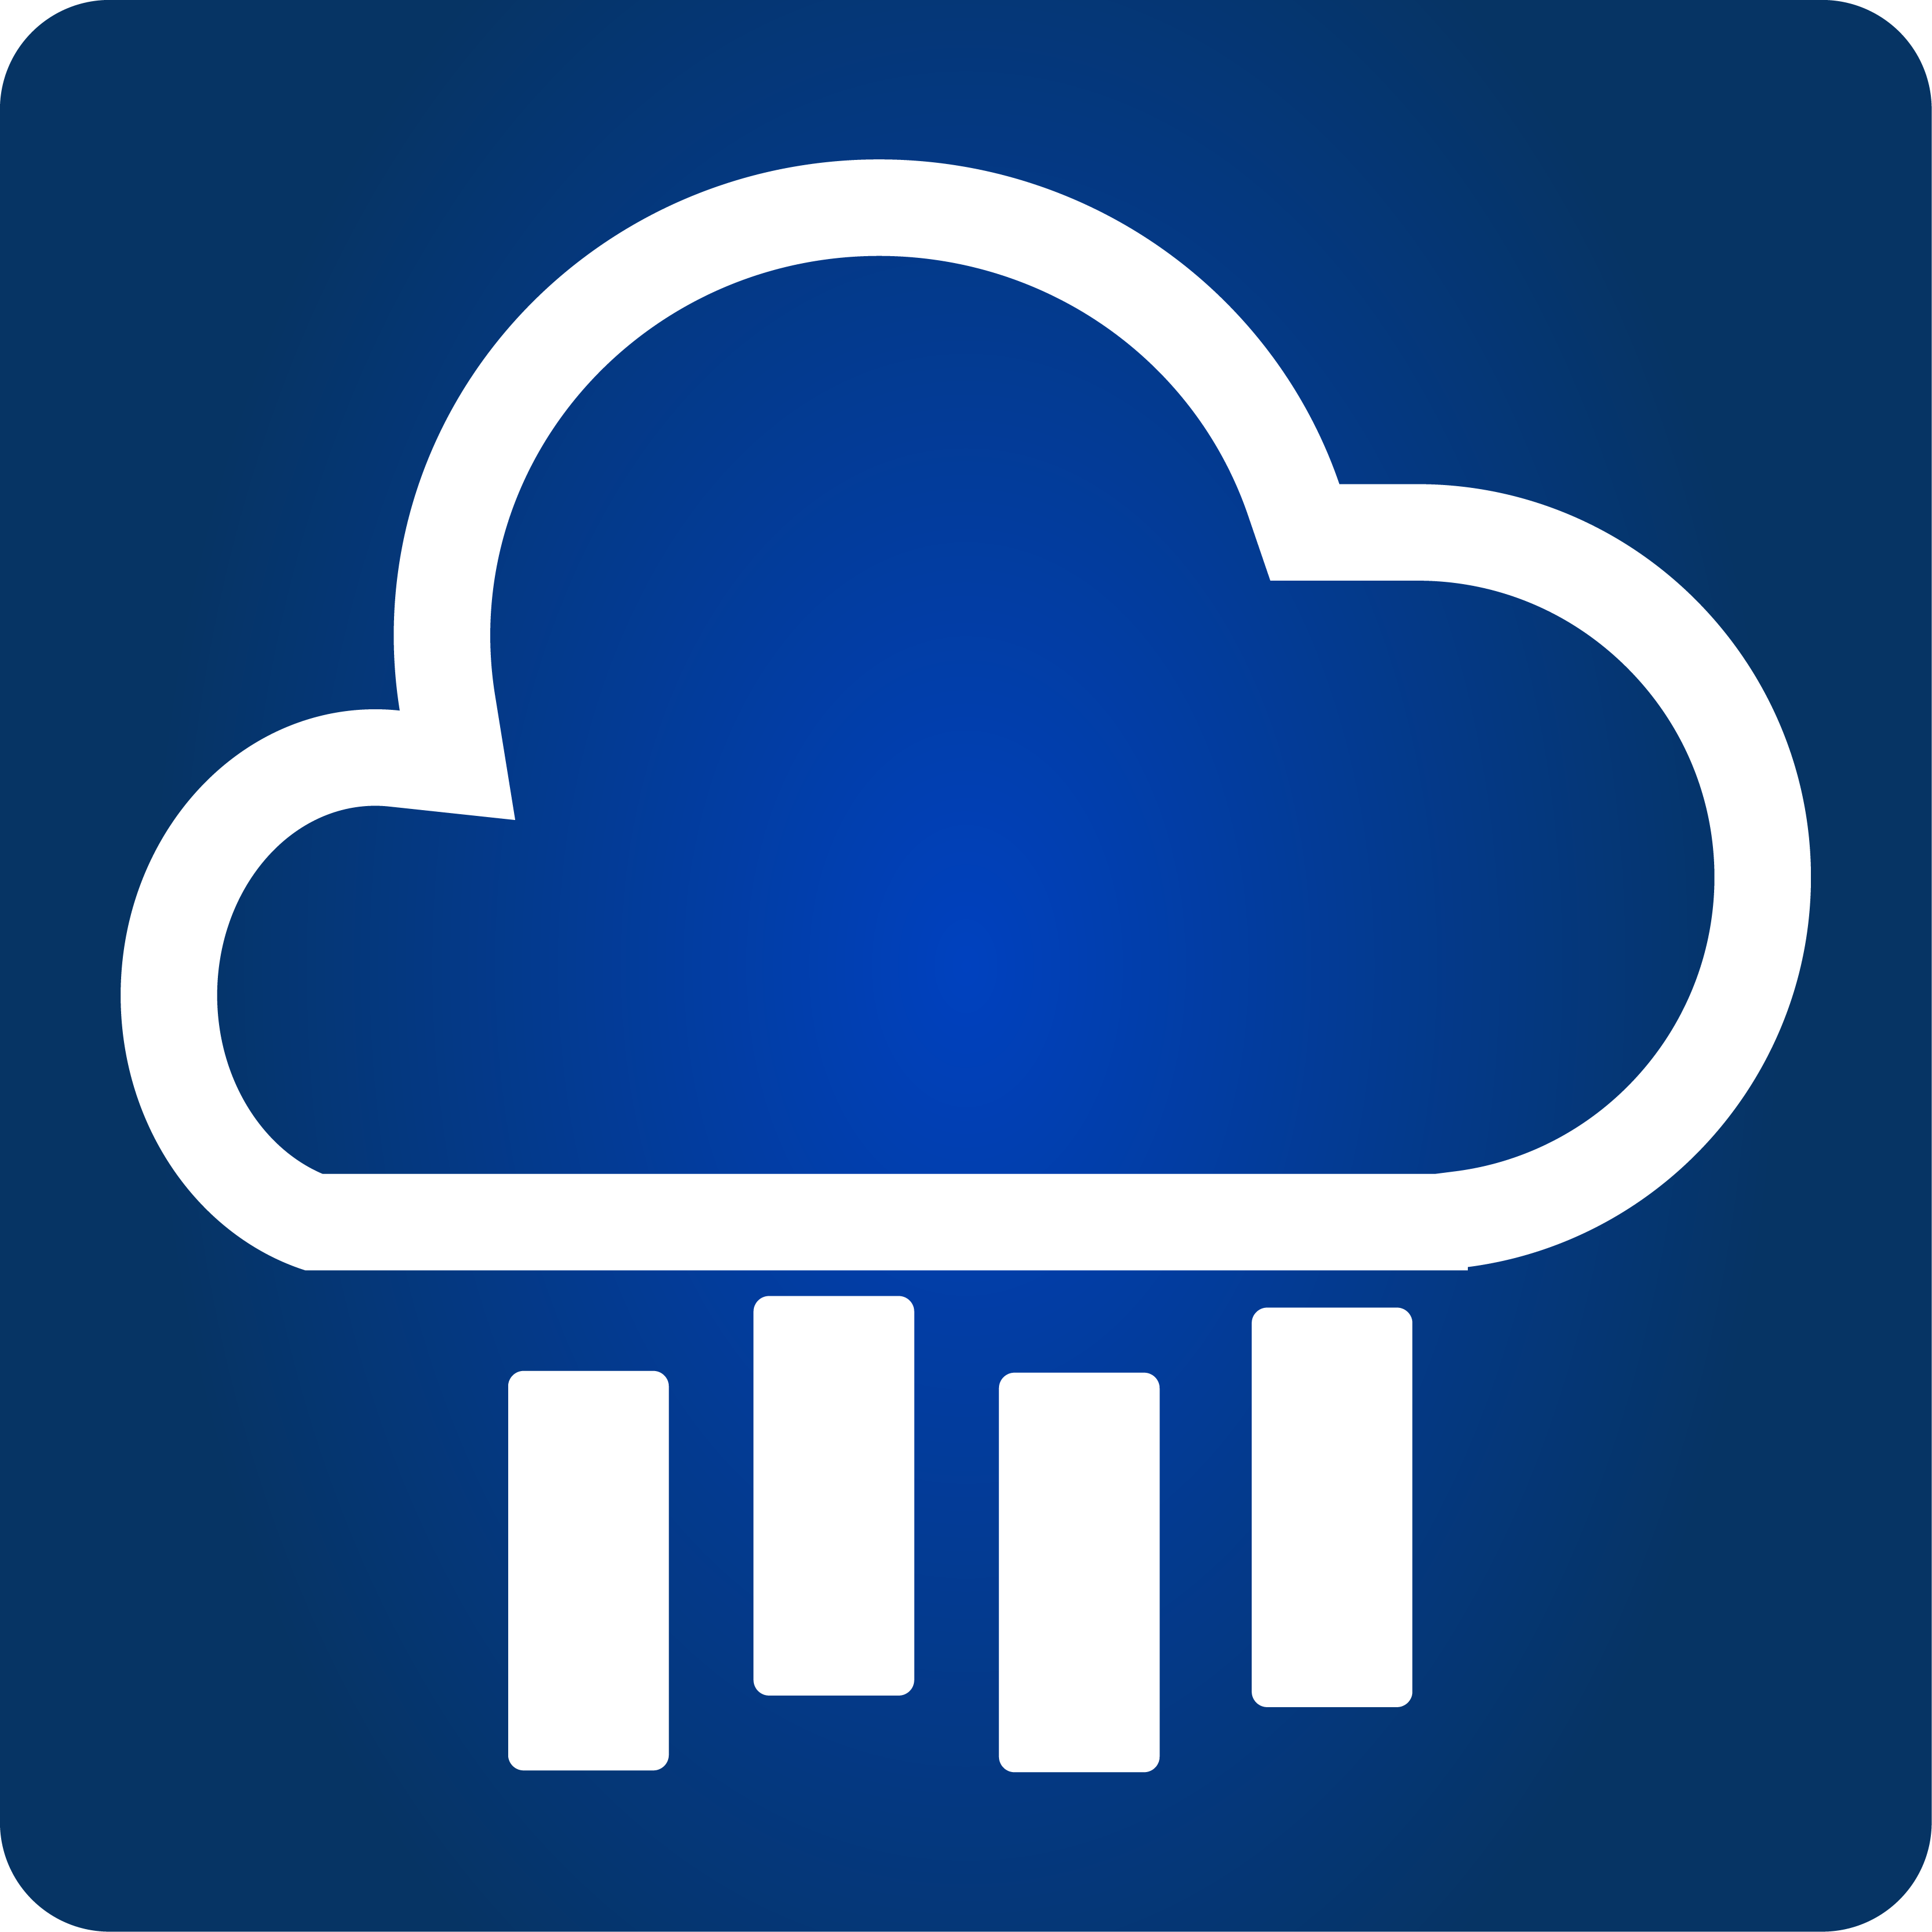 WxReport icon - a cloud with rain falling from it.